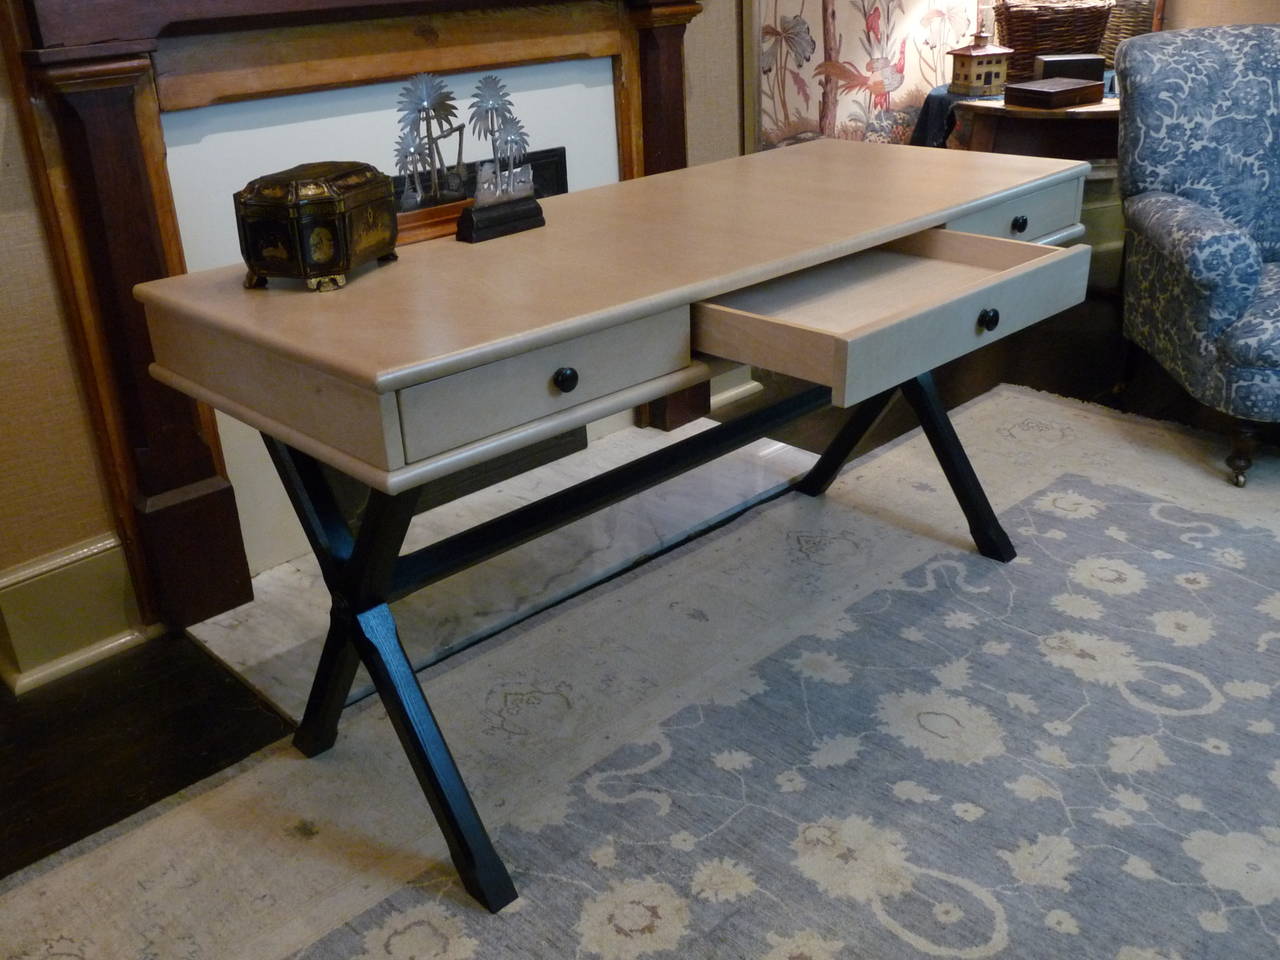 This elegant desk is handmade exclusively for The Outpost in England. It is very solidly constructed with select hardwoods and features three silent-close drawers. The X-frame base is chamfered and ebonized and the desktop is wrapped in luscious